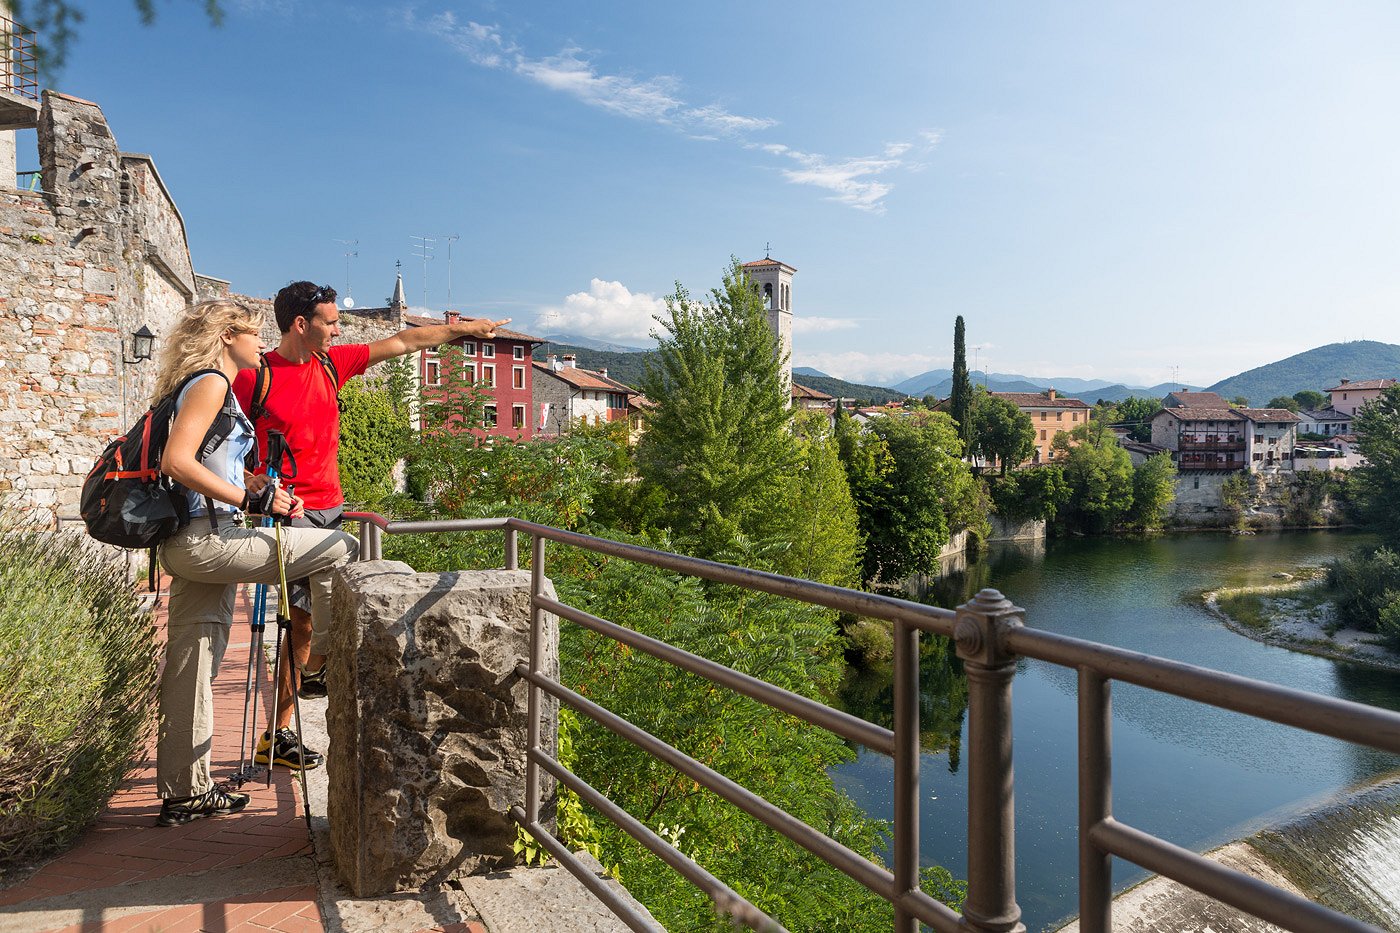 Hikers admire the view on the city of Cividale